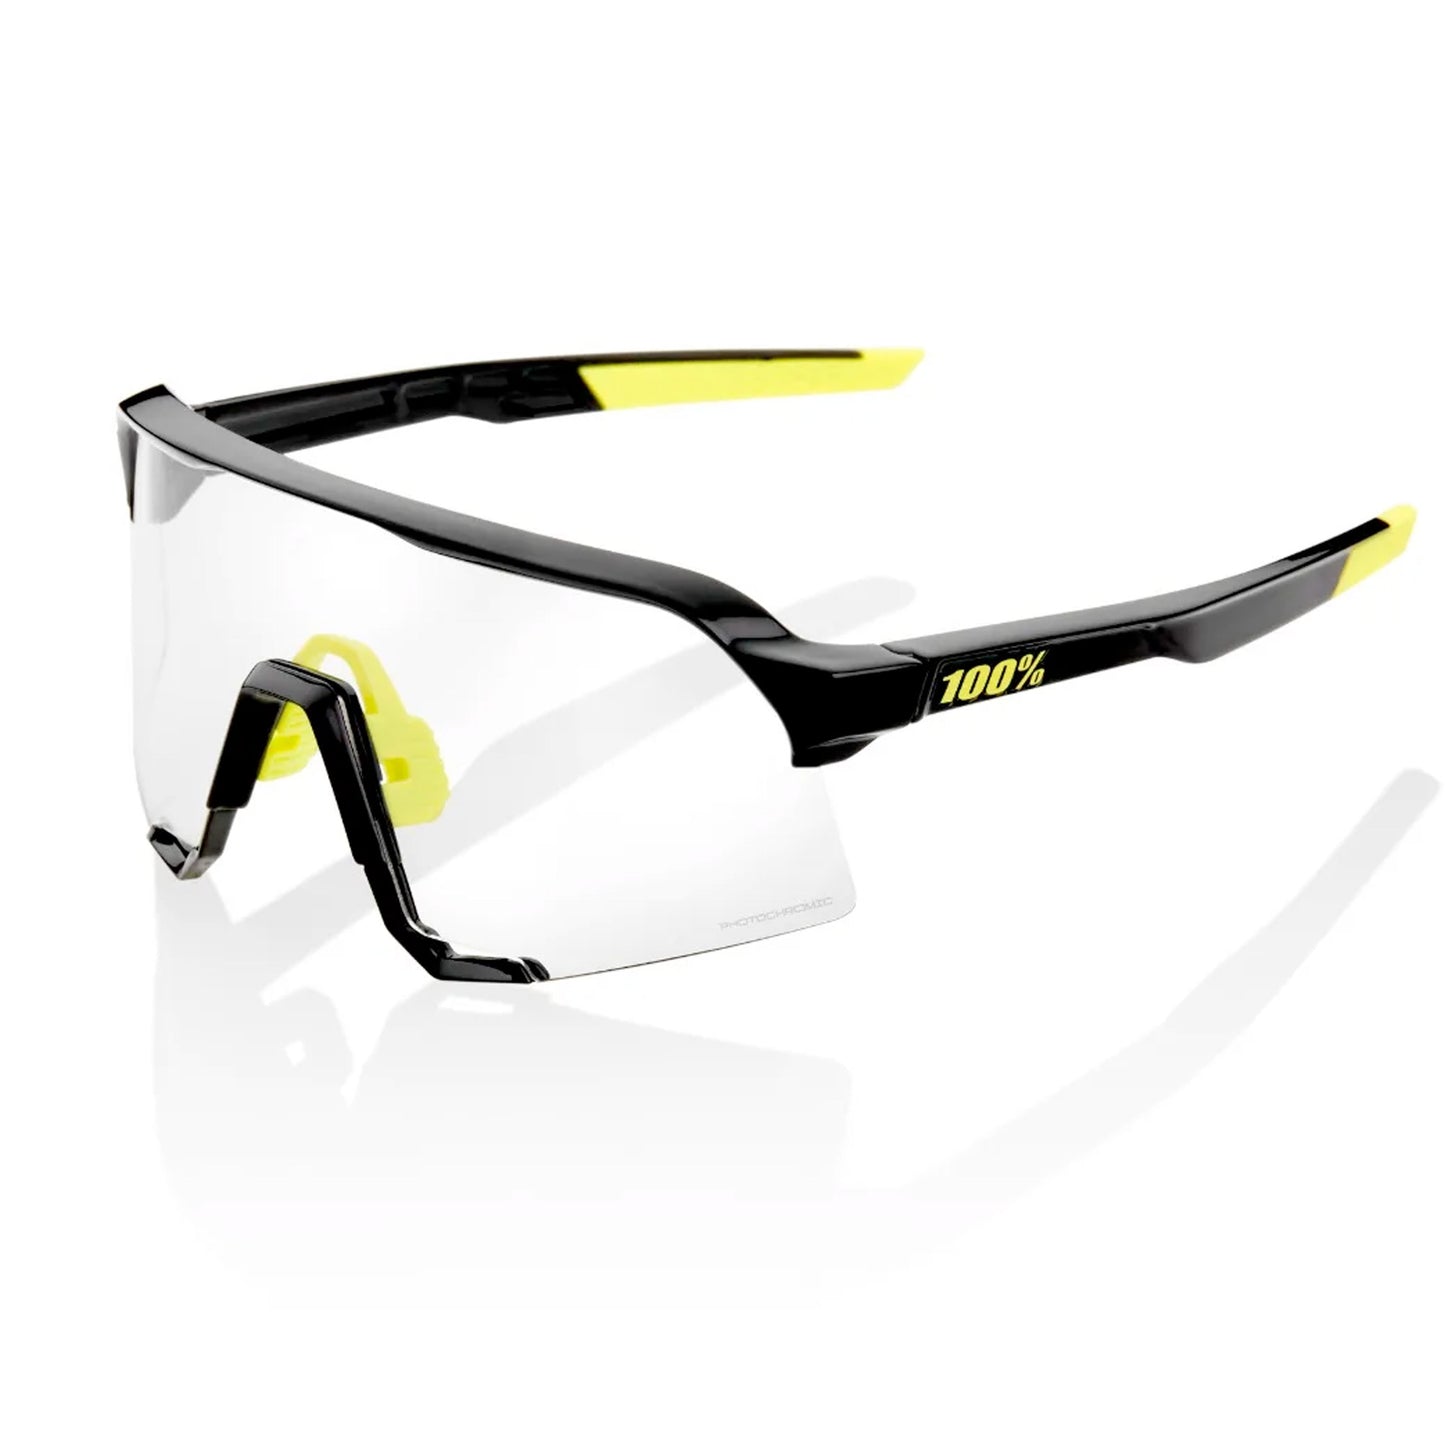 100% S3 Cycling Sunglasses - Gloss Black with Photochromic Lens